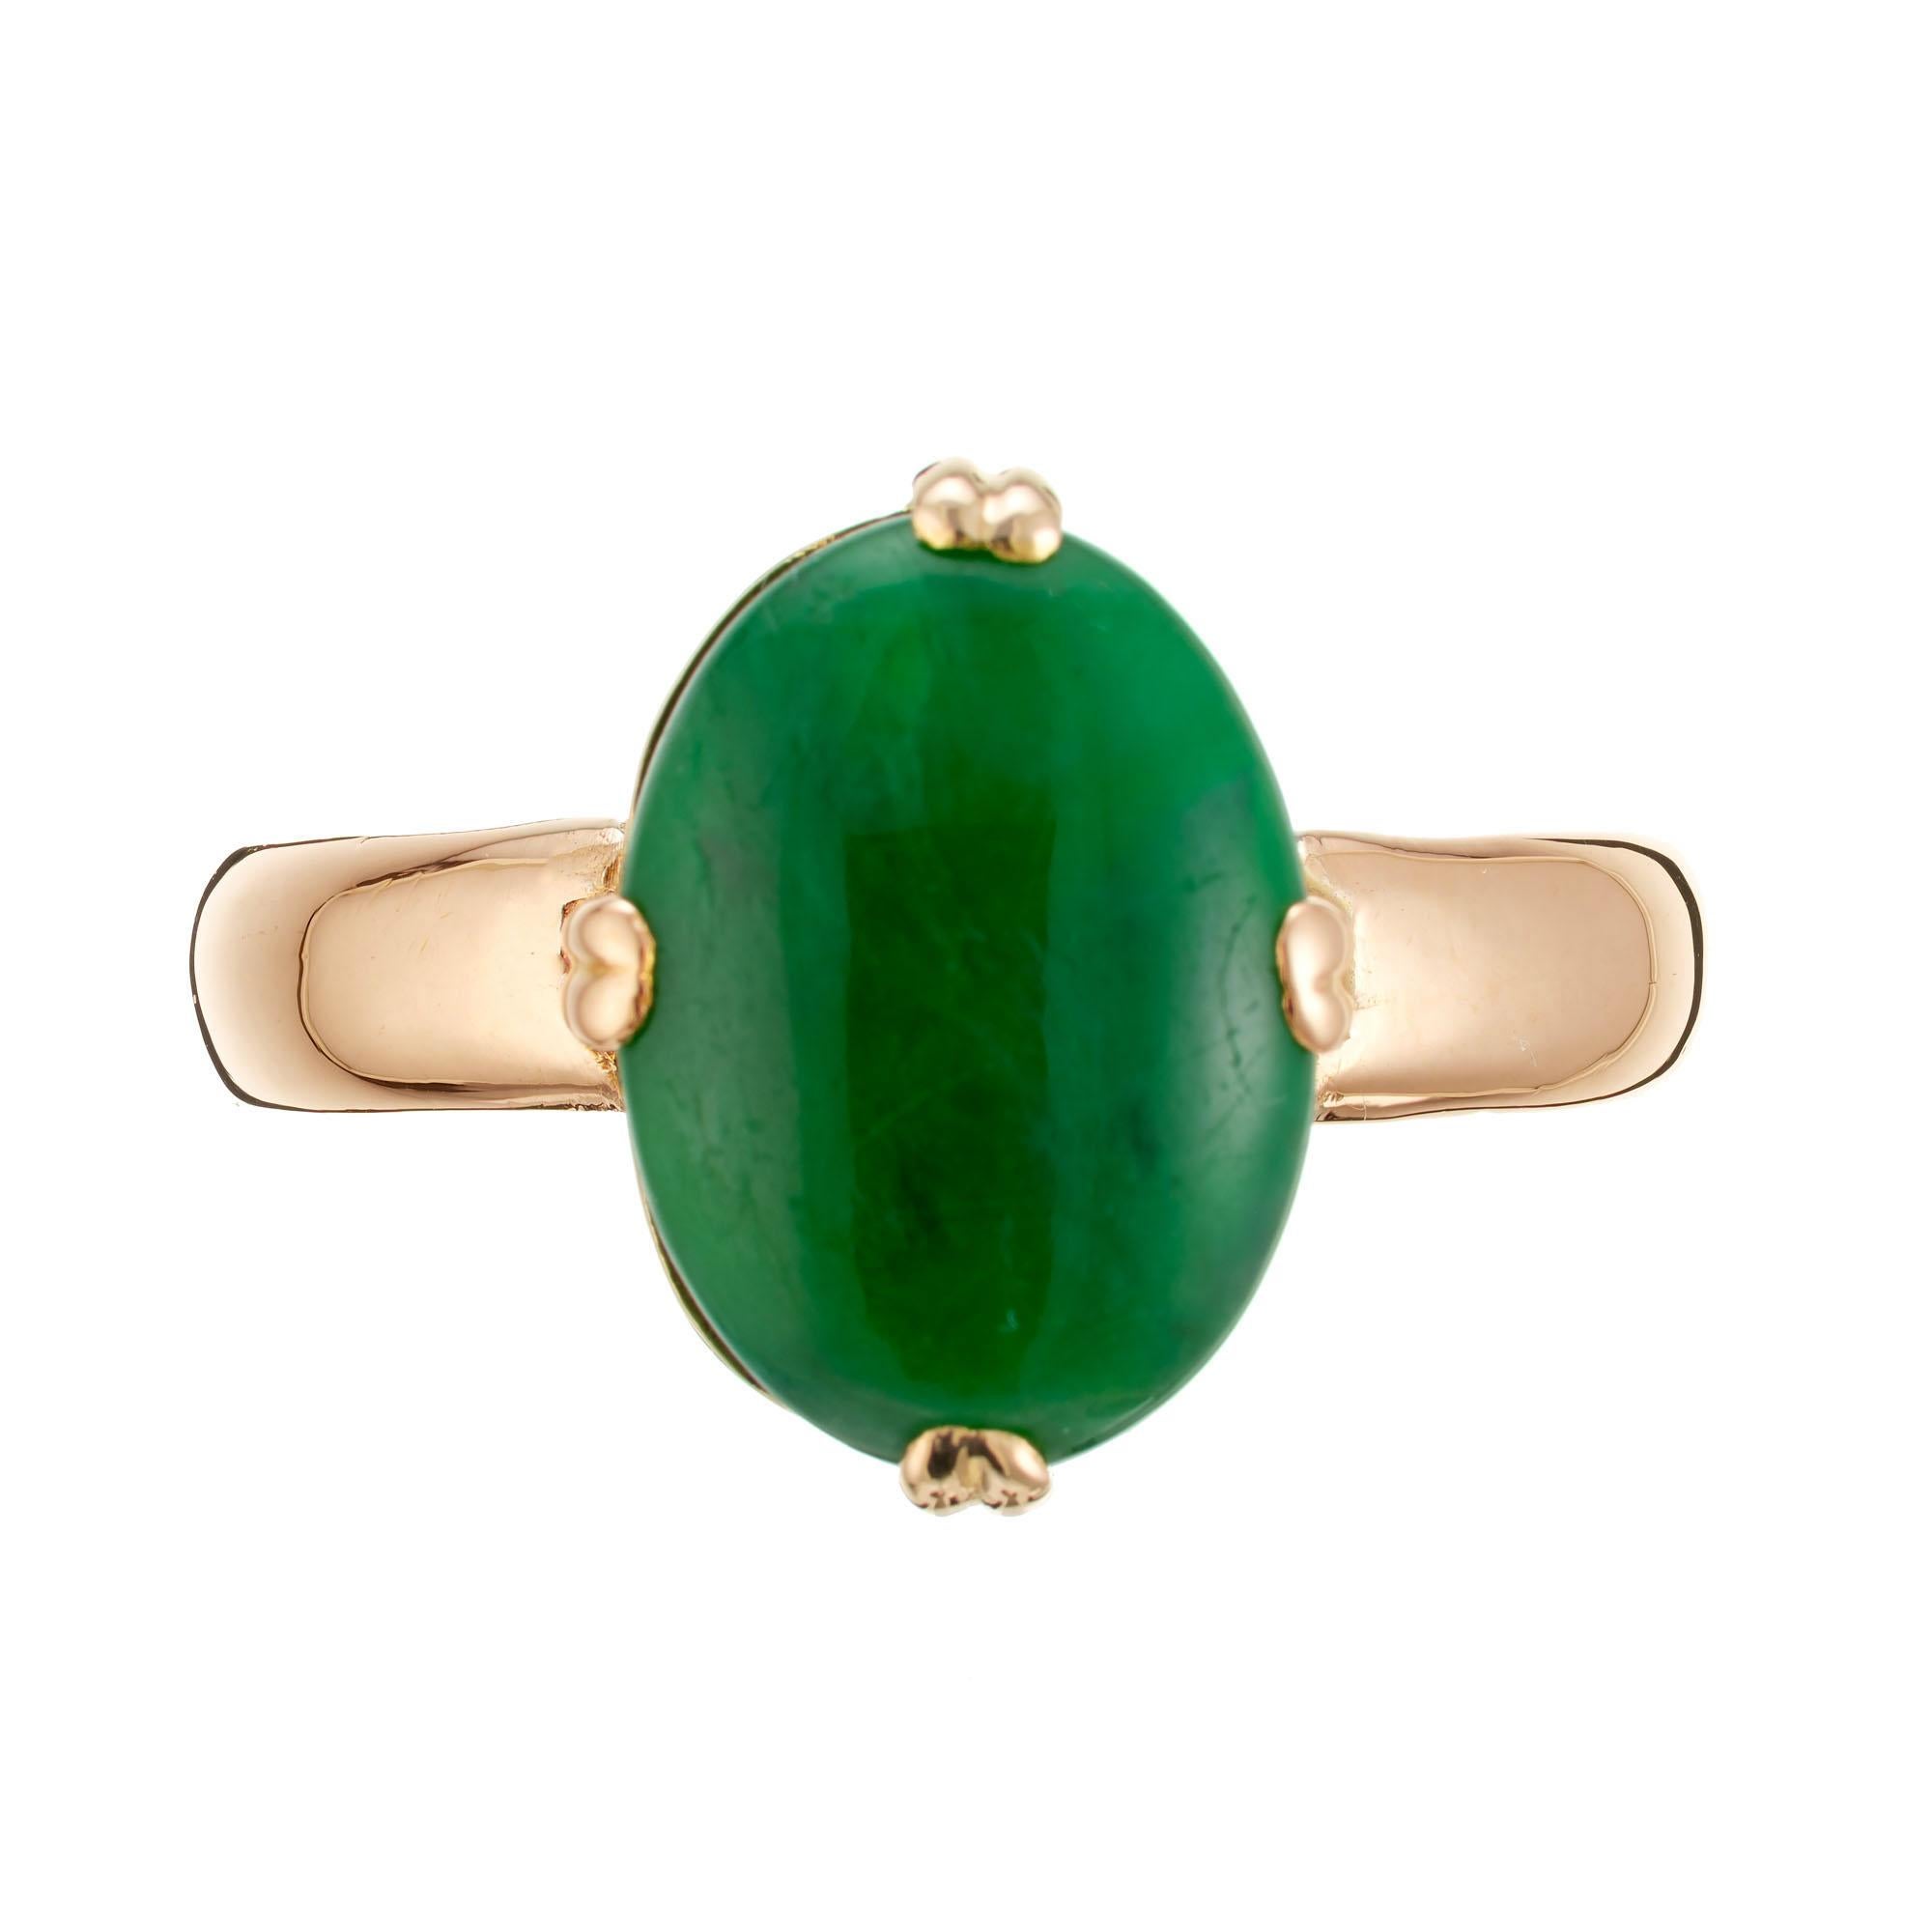 1950's GIA certified oval natural untreated jade stone set in 14k rose gold ring. 

1 oval cabochon green jadeite jade, GIA certificate # 5211798001
Size: 7.5 and sizable
14k rose gold 
Tested: 14k
4.0 grams 
Width at top: 13.5mm
Height at top: